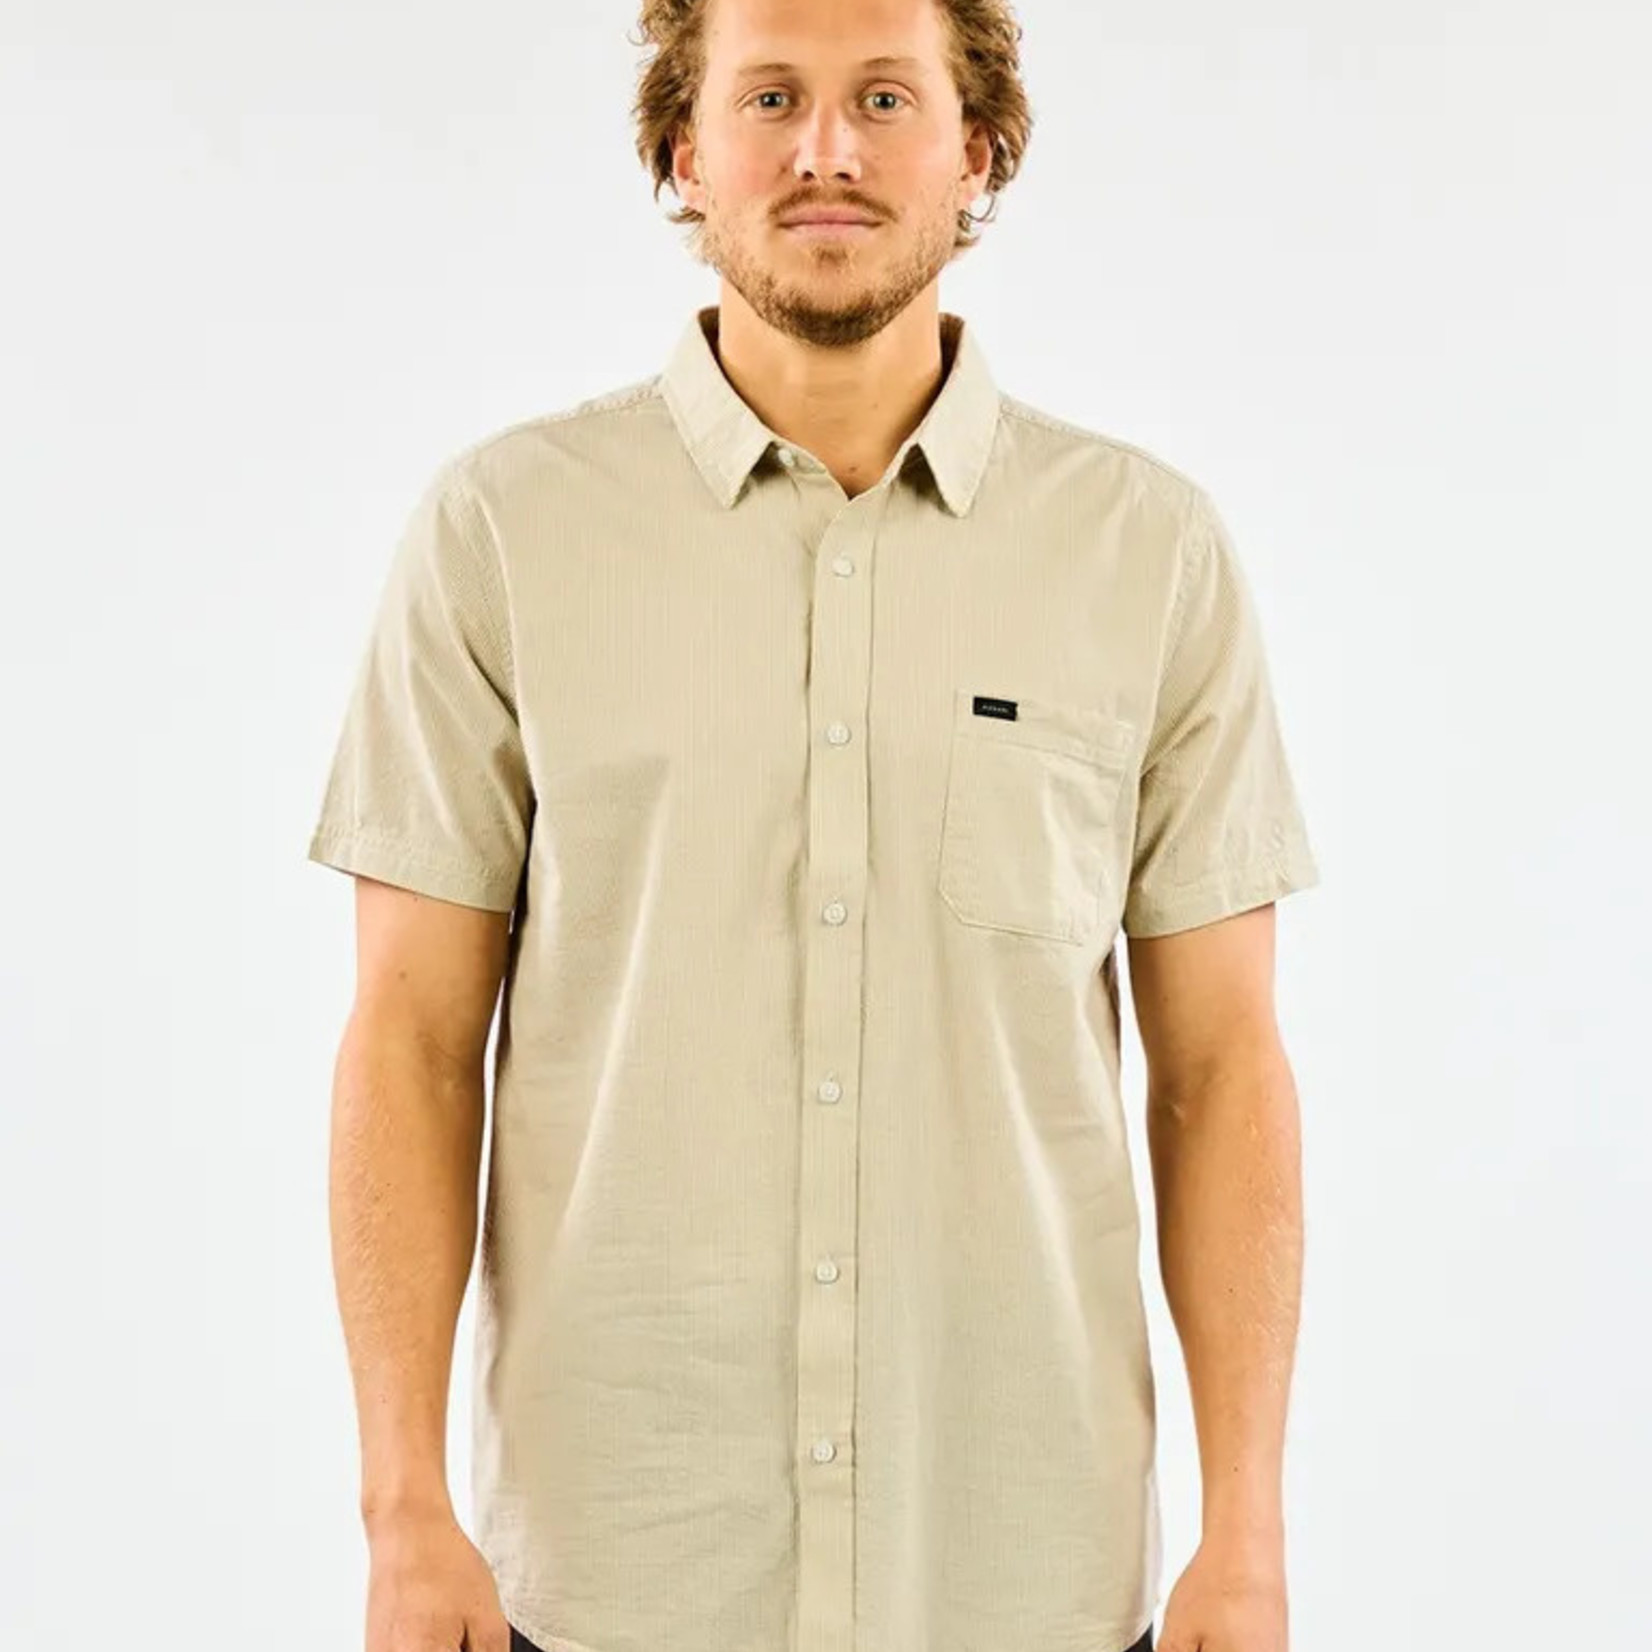 RipCurl Rip Curl Ourtime Texture Shirt